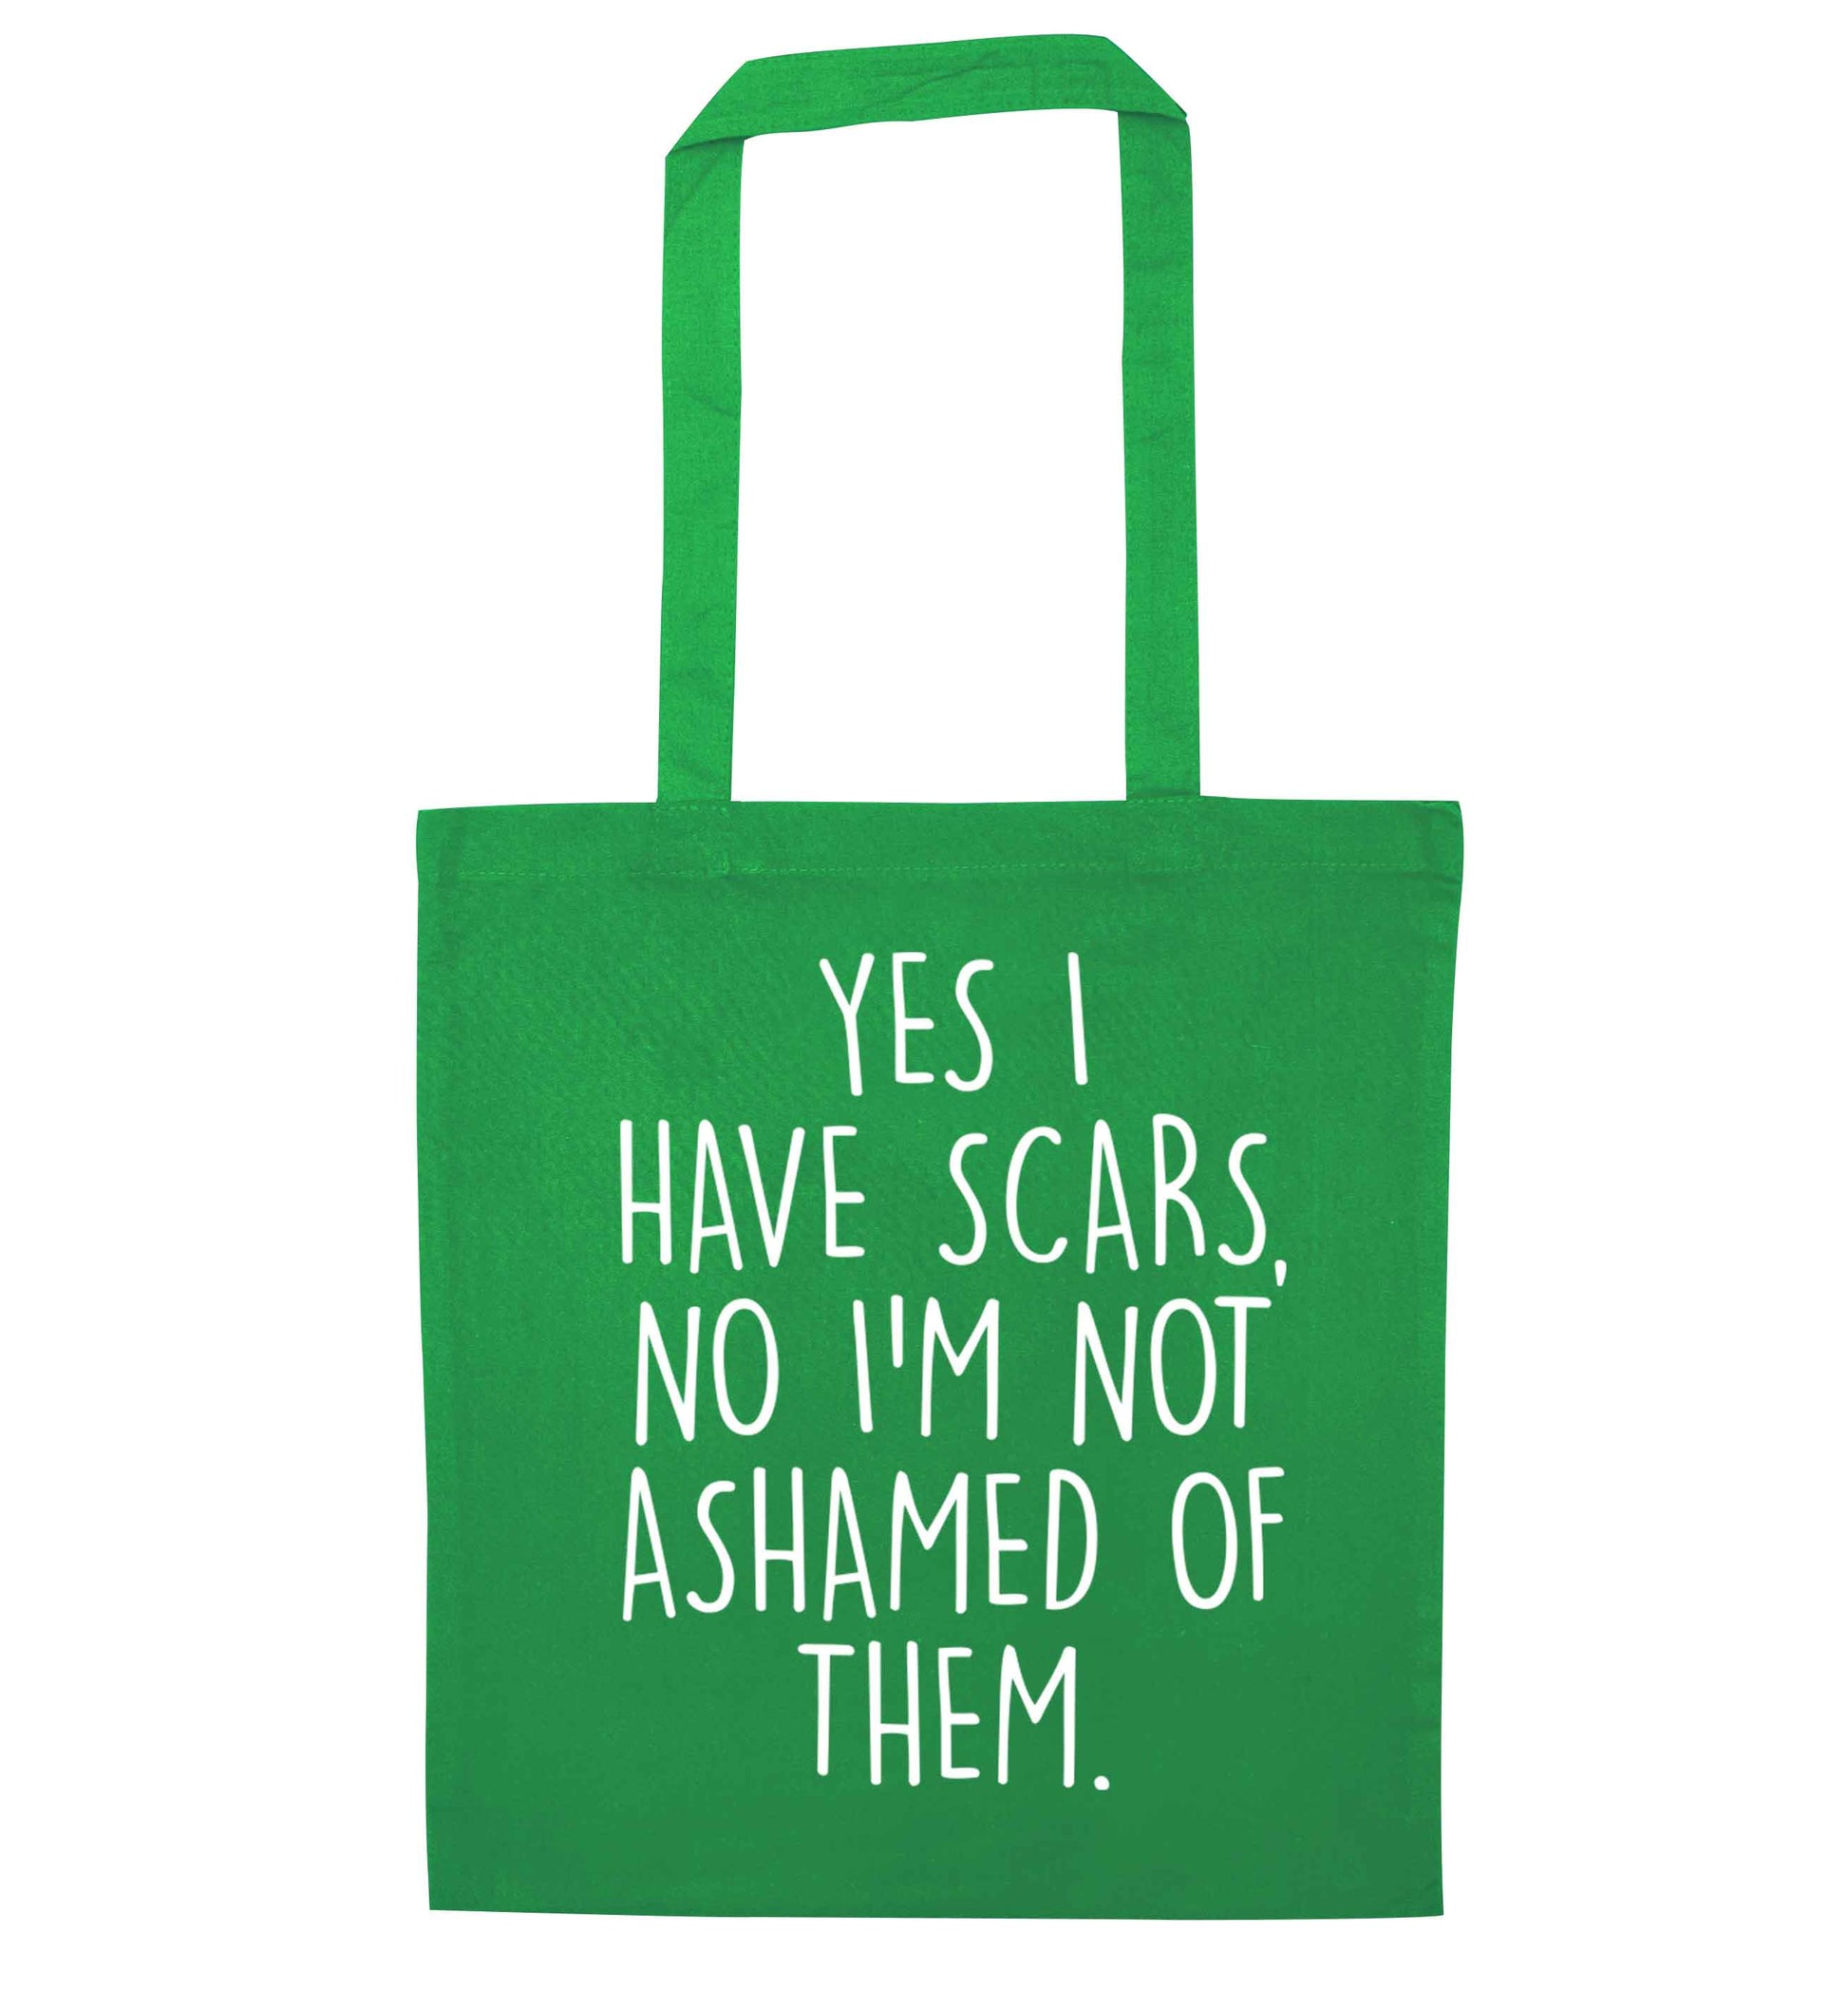 Yes I have scars, no I'm not ashamed of them green tote bag